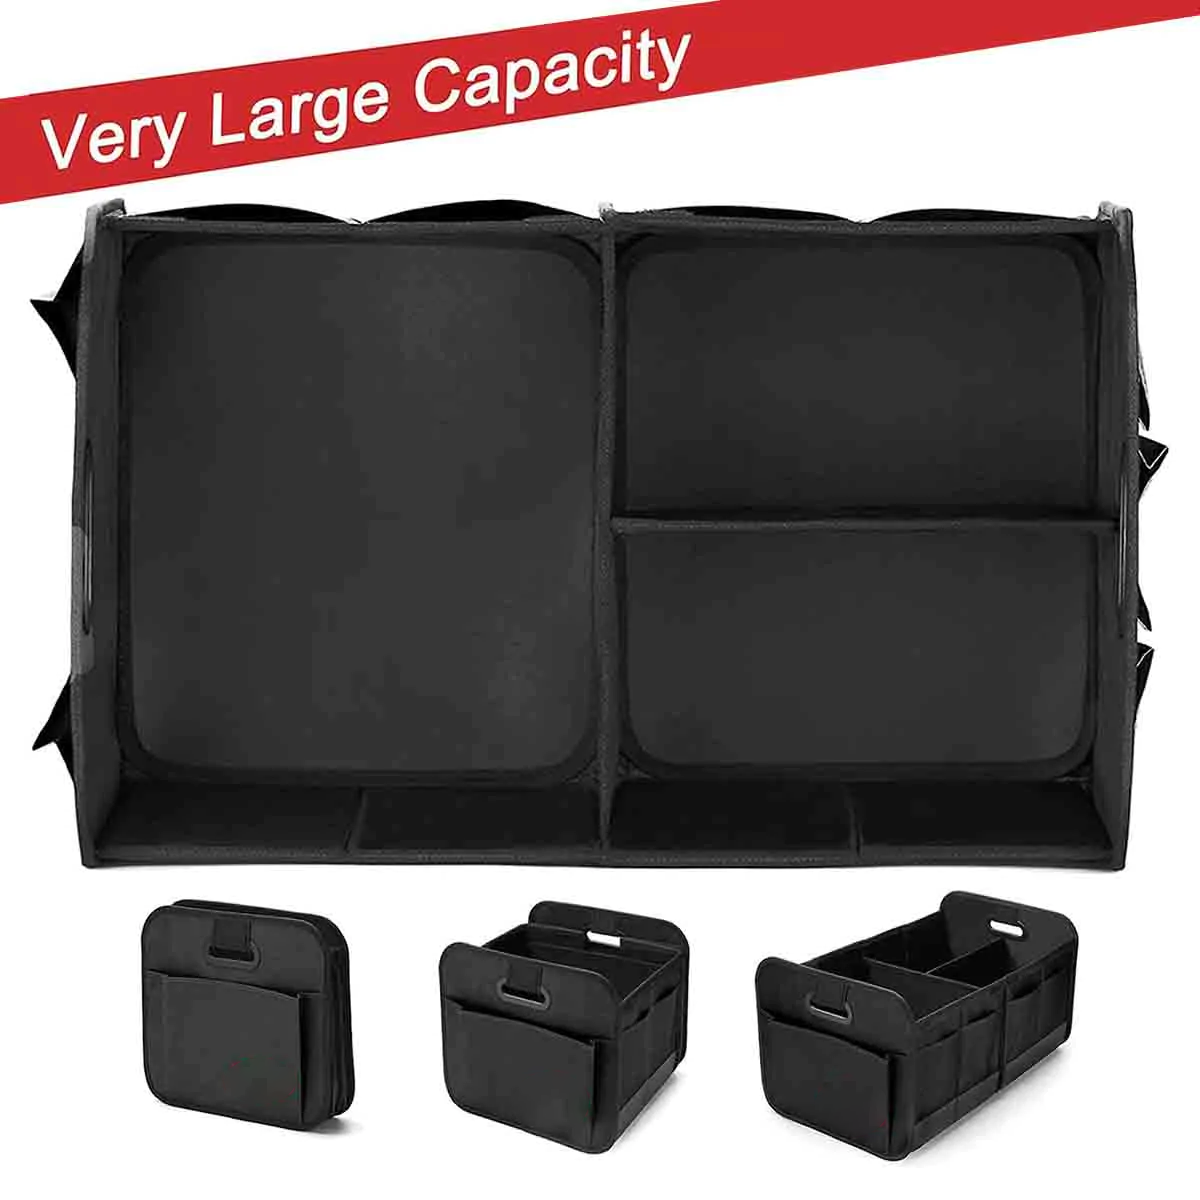 Custom Text For Car Trunk Organizer Storage, Compatible with All Cars, Reinforced Handles, Collapsible Multi, Compartment Car Organizers, Foldable and Waterproof, 600D Oxford Polyester FM12995